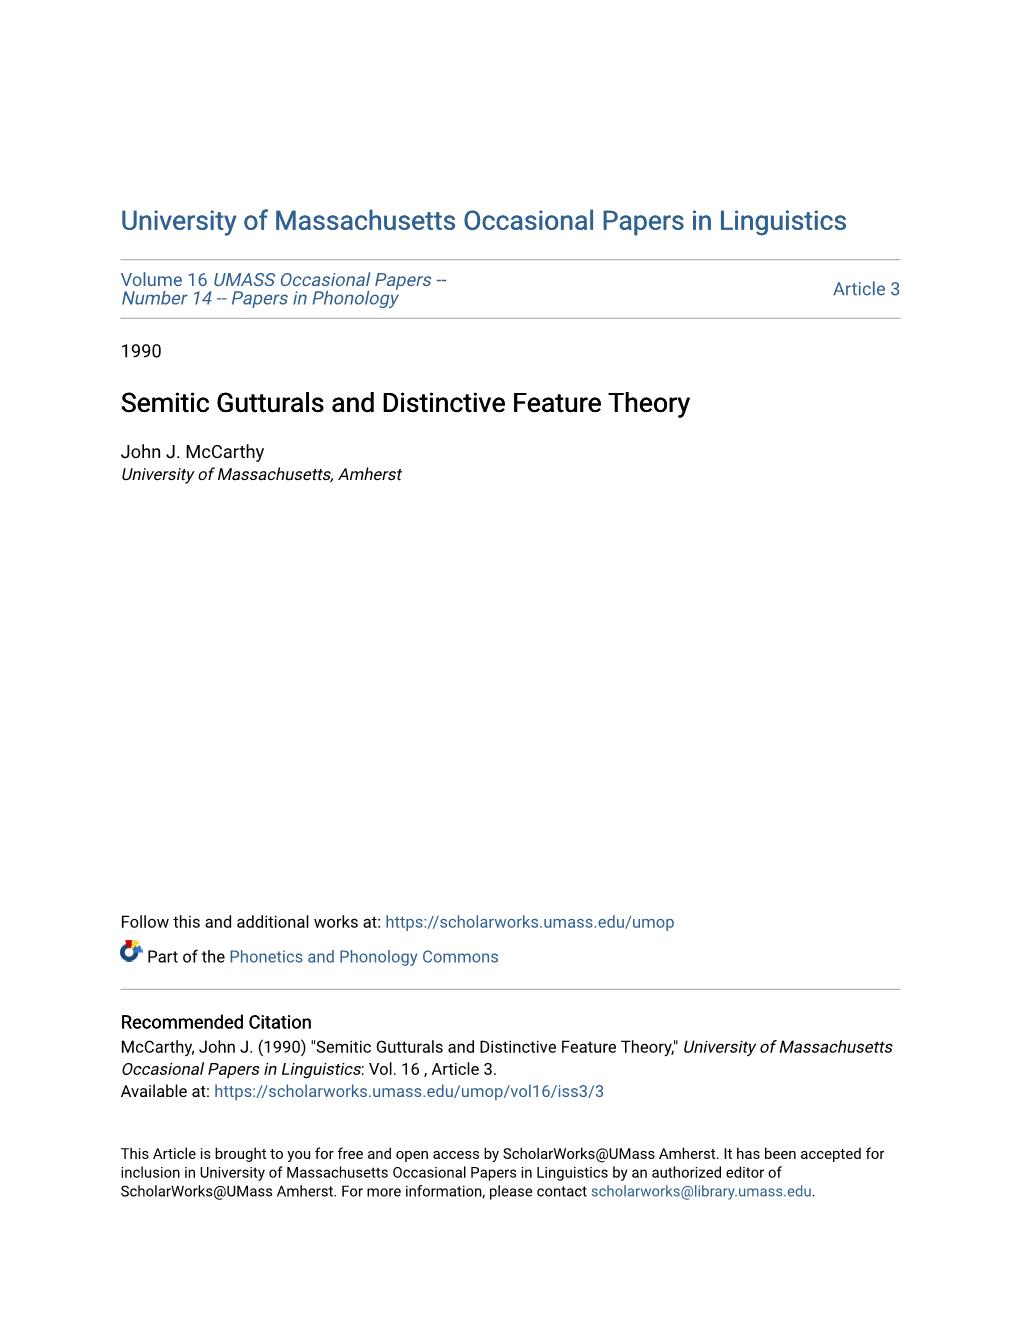 Semitic Gutturals and Distinctive Feature Theory